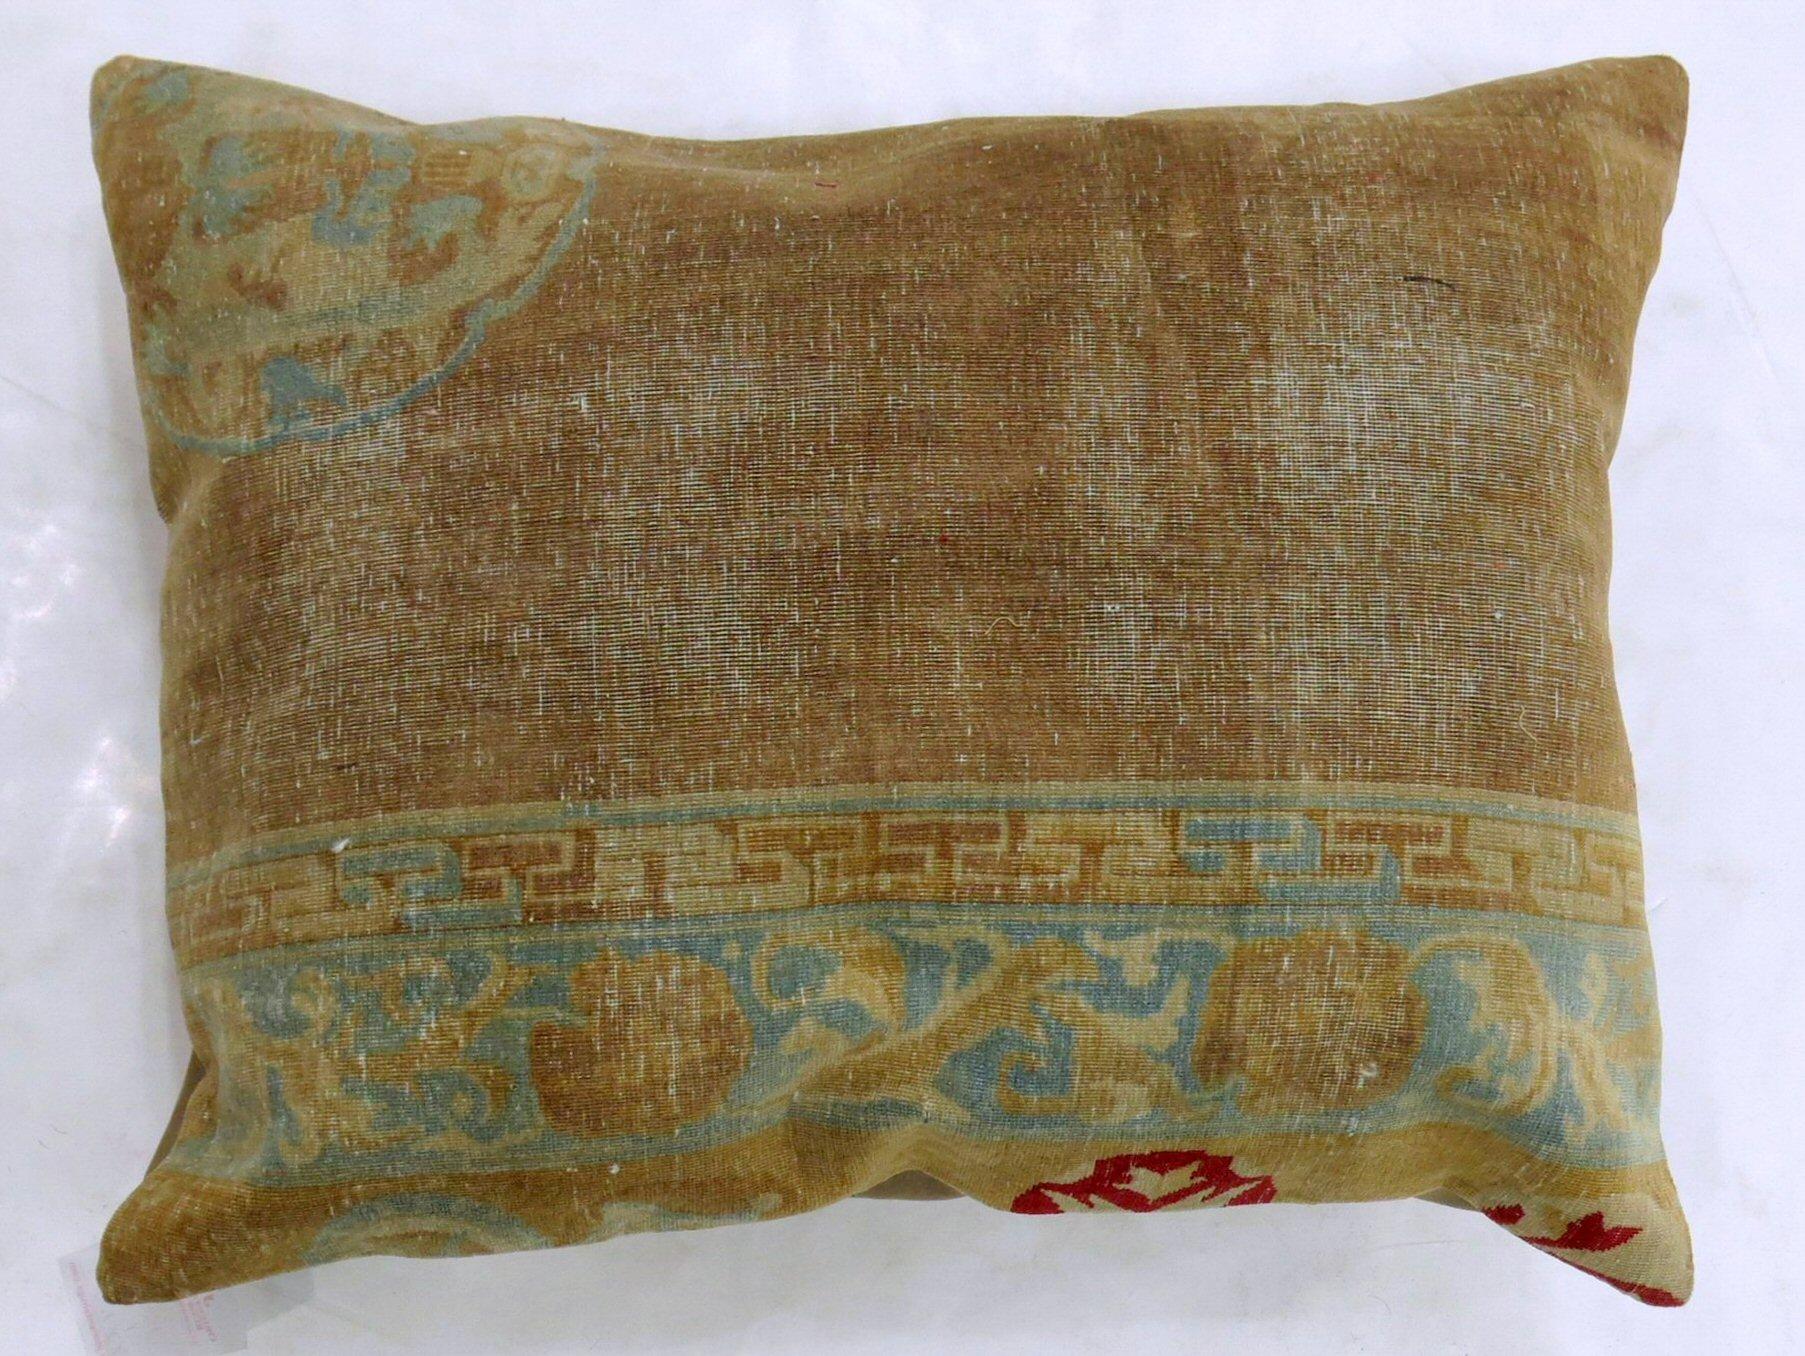 A pillow made from a 19th century Chinese rug. Zipper closure and insert included

Measures: 19” x 25'.